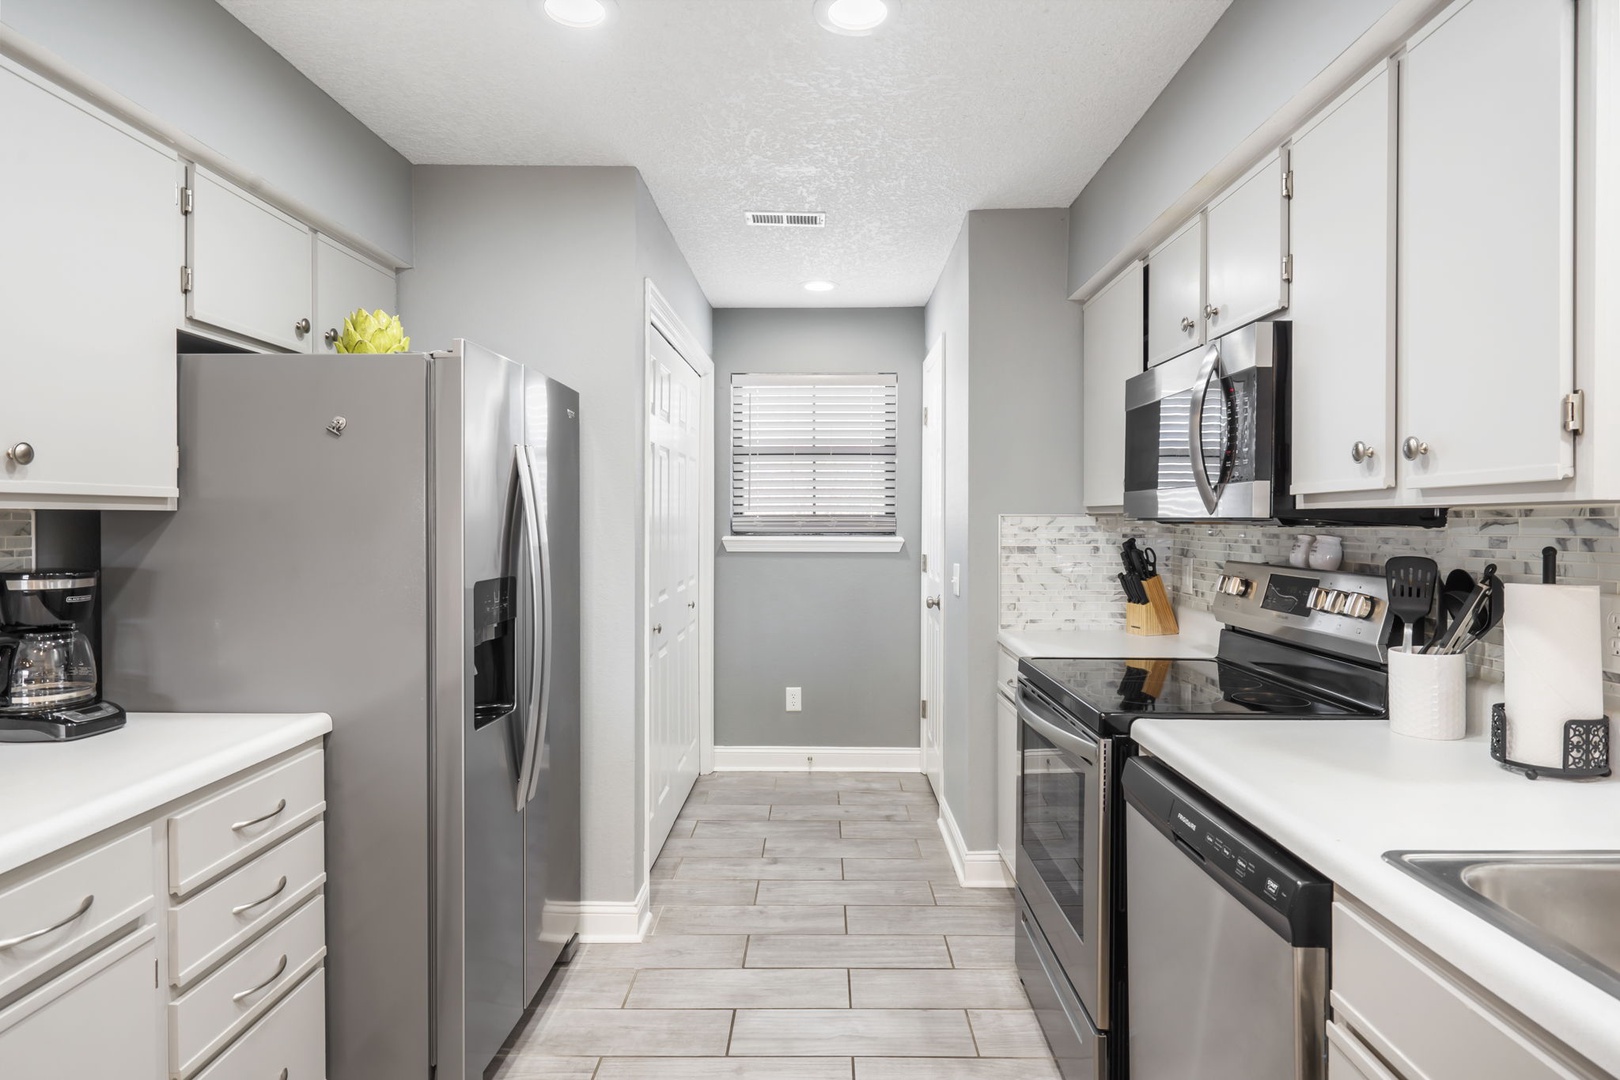 Unit 19: The sleek, updated kitchen is spacious & well-equipped for your visit